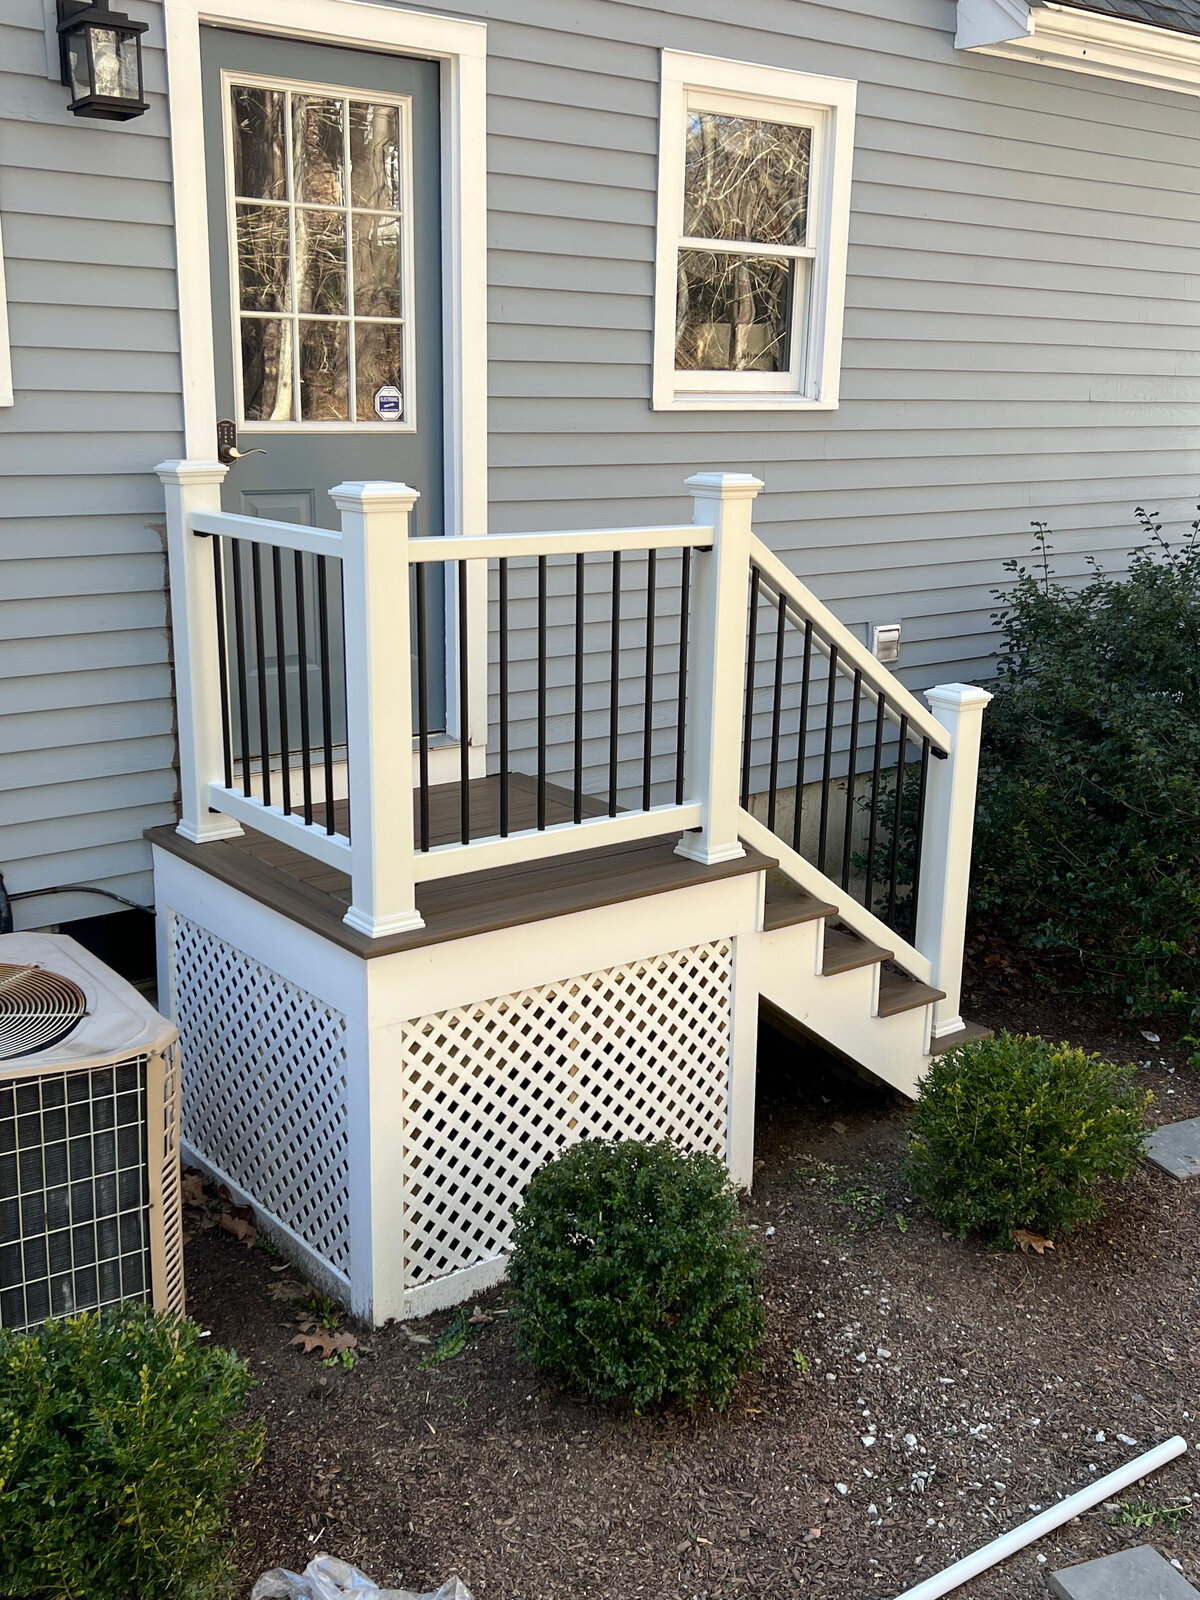 A view of a small set of stairs with white trellis facing